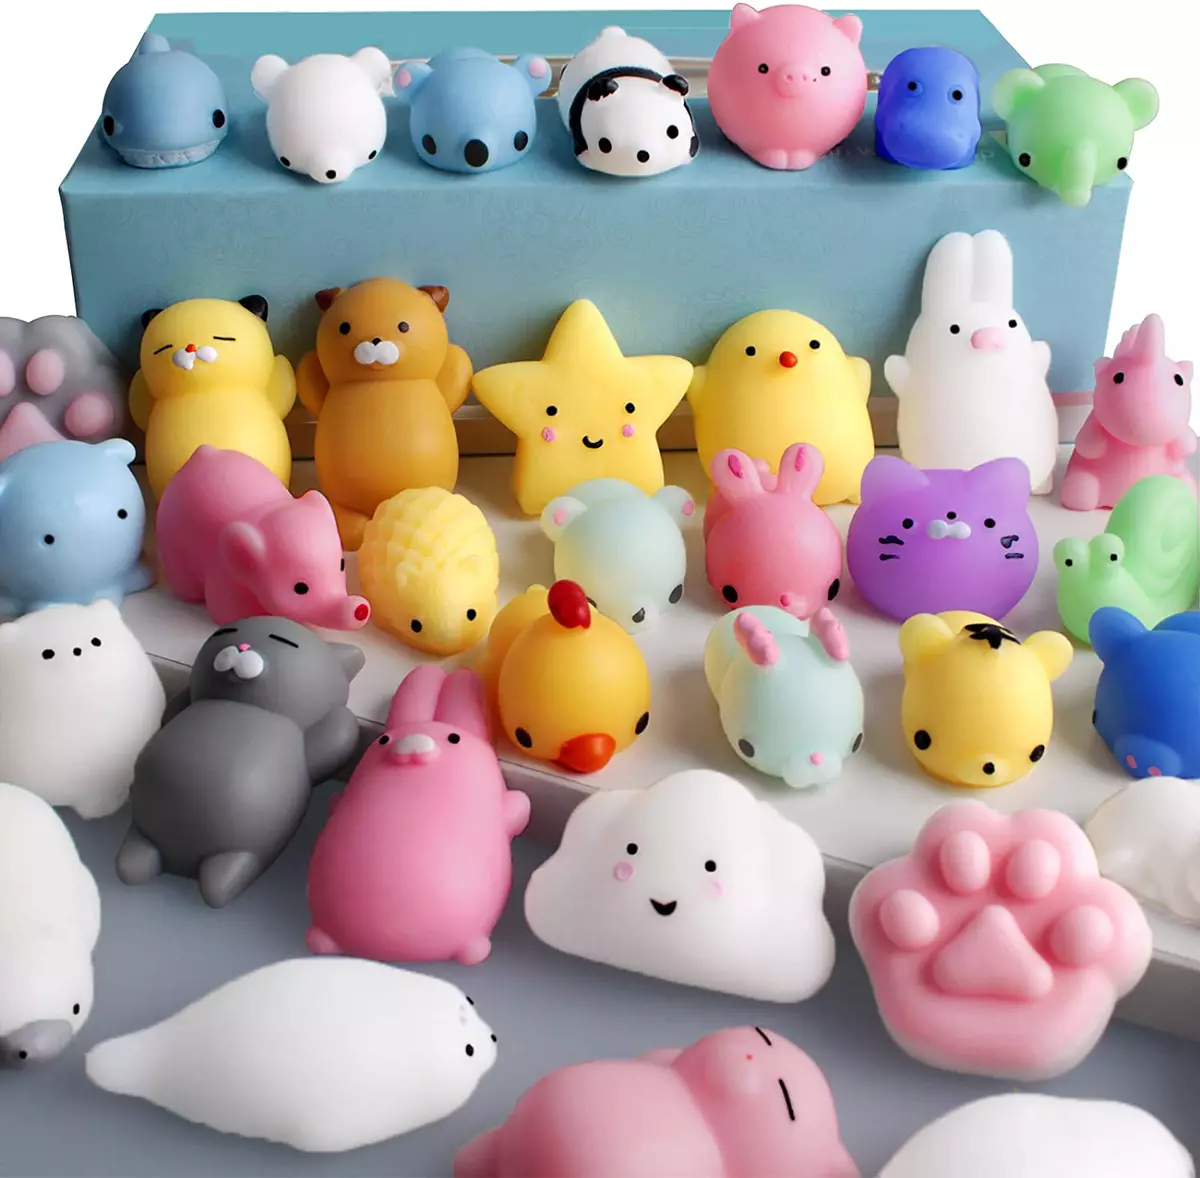 Age Mochimochi Squishy Toy Pack - Stress Relief Collectibles For Ages 7+